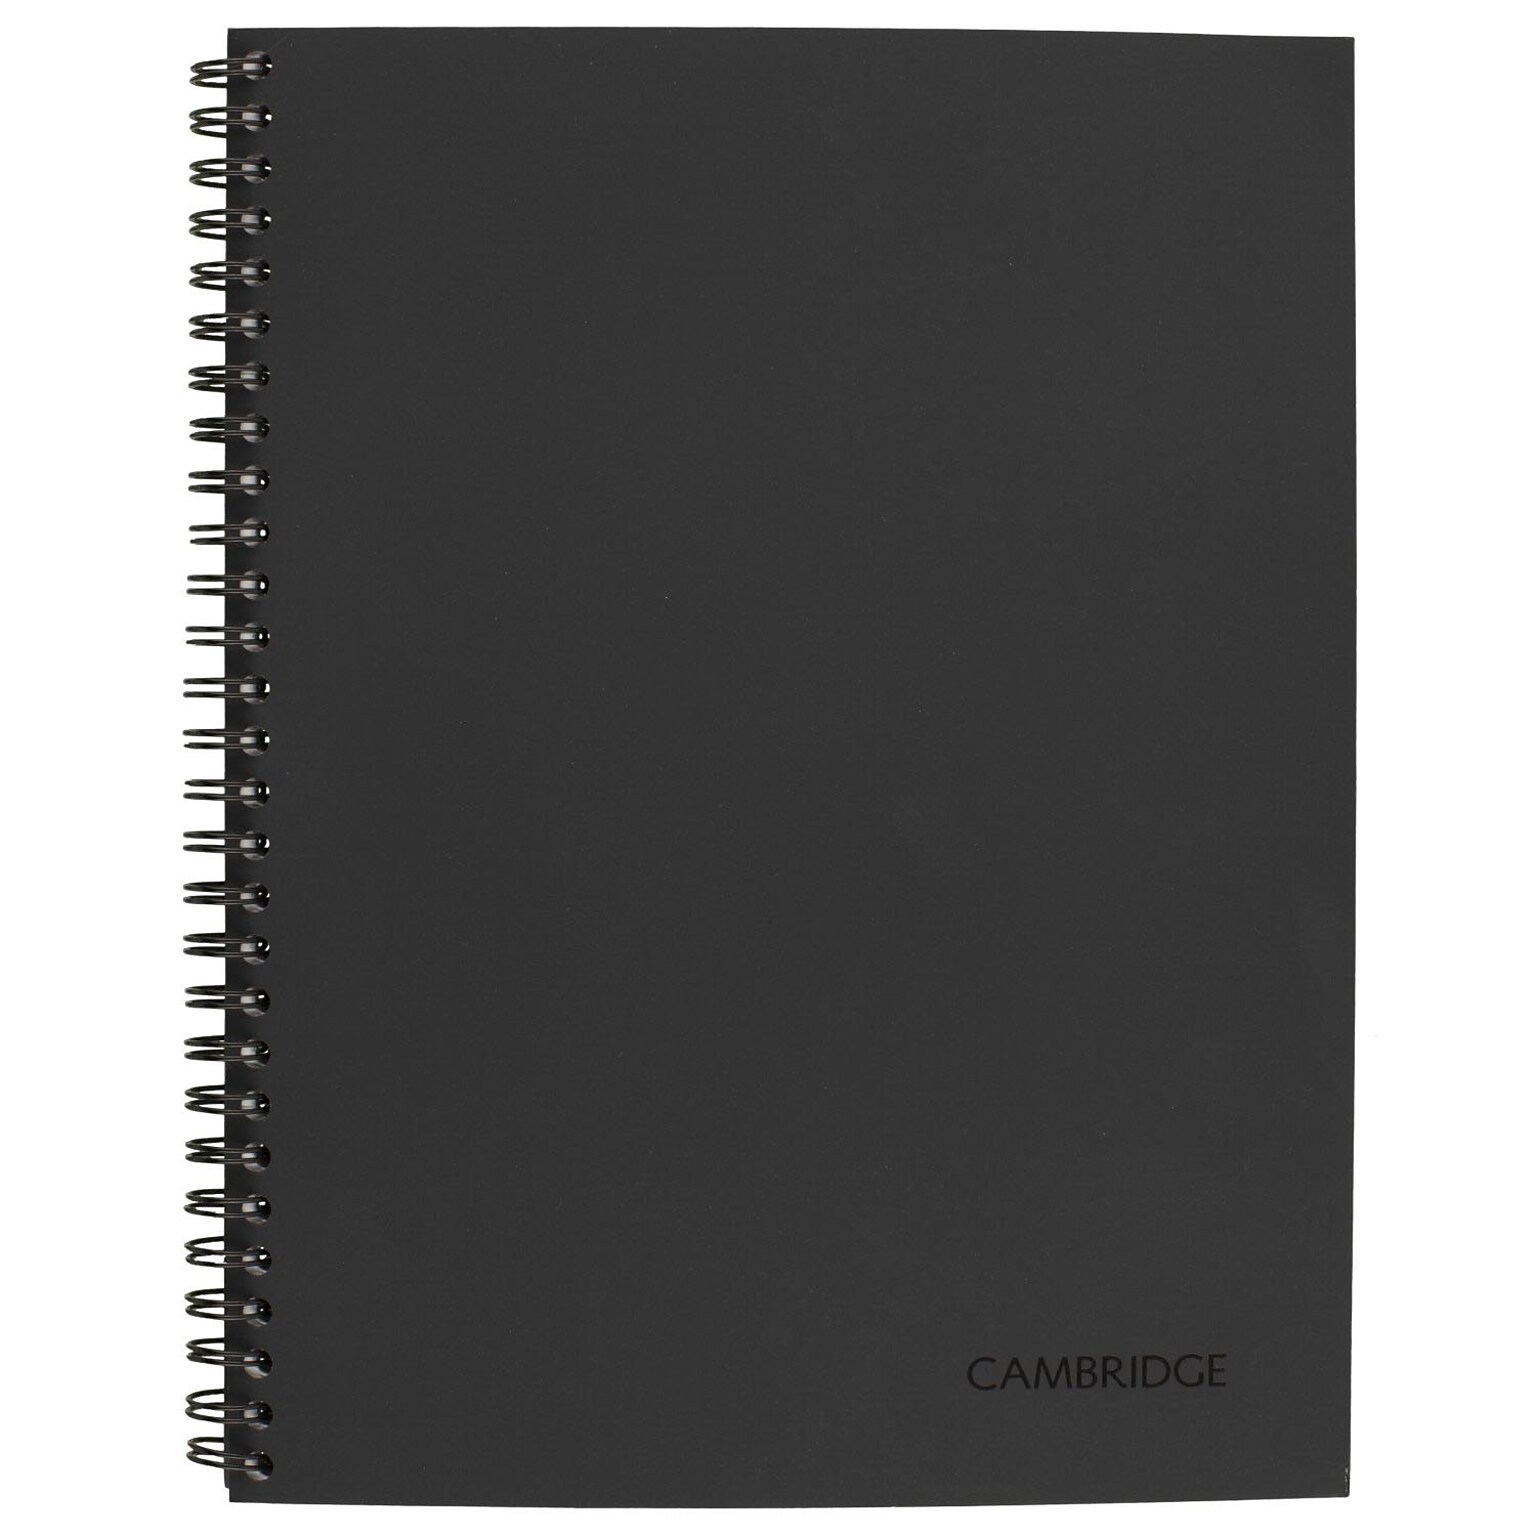 Cambridge Action Planner Professional Notebook, 7.25 x 9.5, Wide Ruled, 80 Sheets, Charcoal Gray (06122)